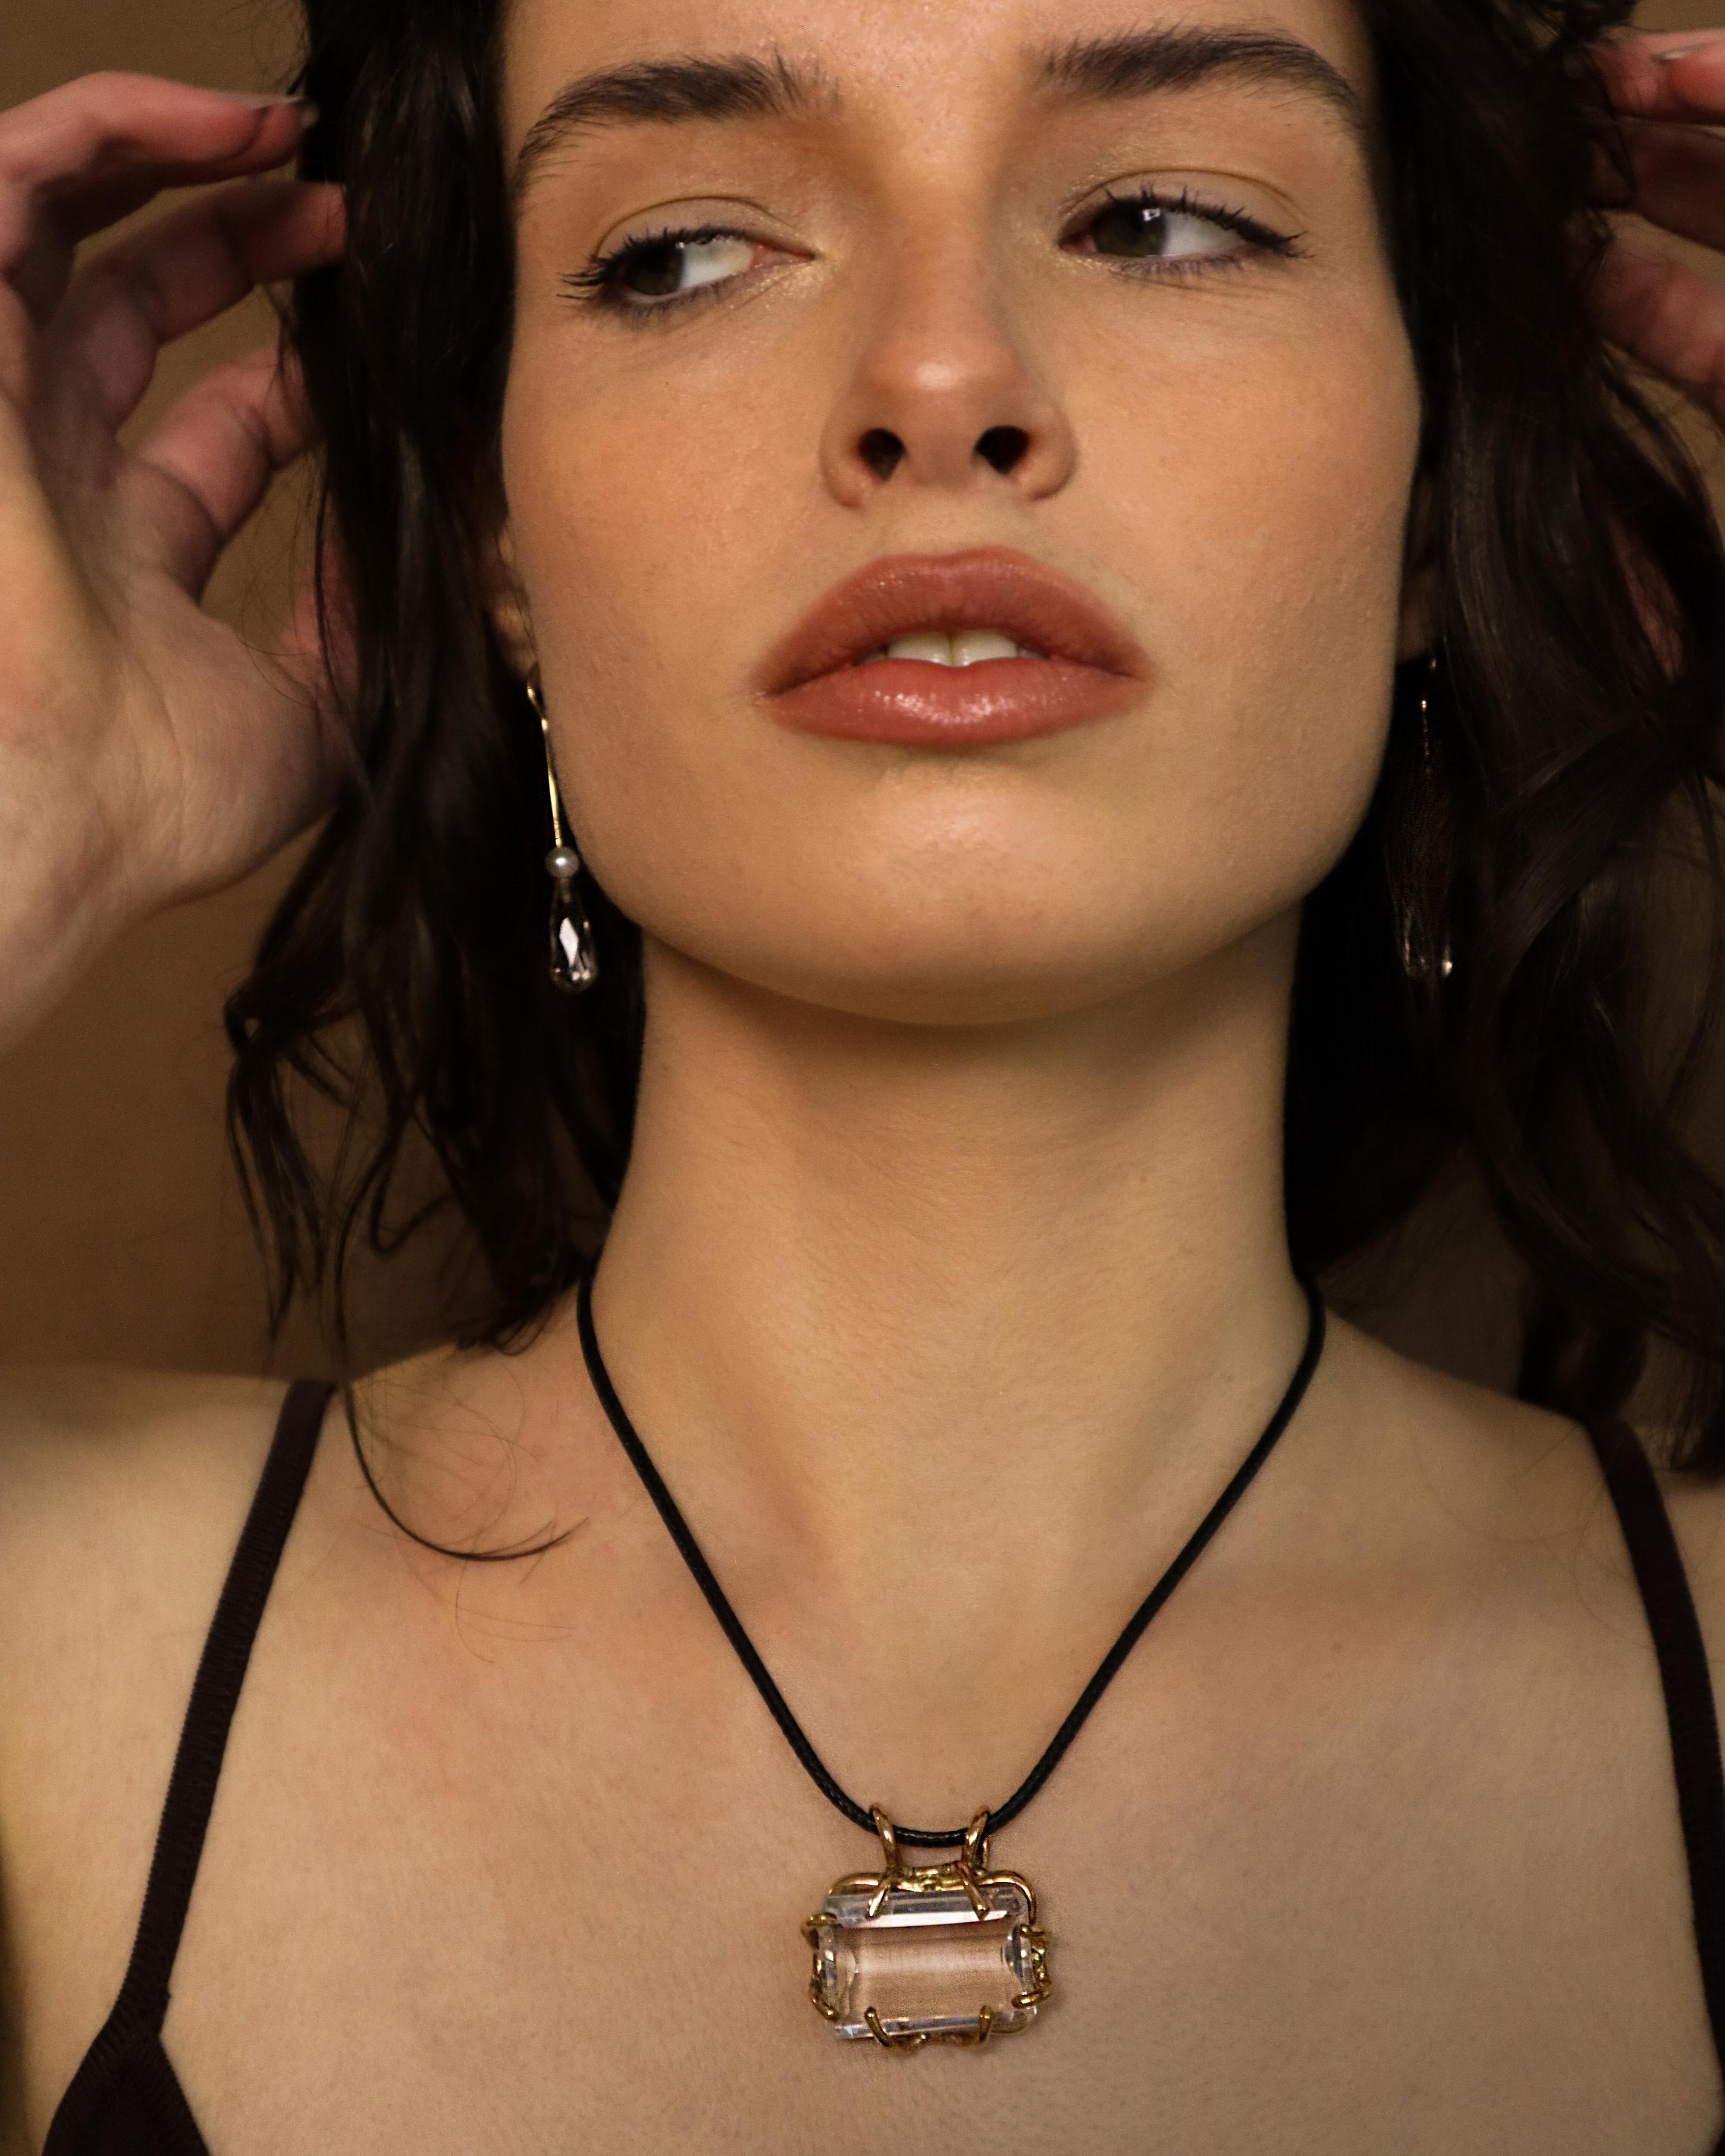 The Brut Statement Necklace has been carefully crafted to represent the iconic rawness of the brutalist aesthetic, combined with the lucite style, and adorned with a stunning semiprecious quartz, all in luxurious 18k gold filled. A truly exquisite